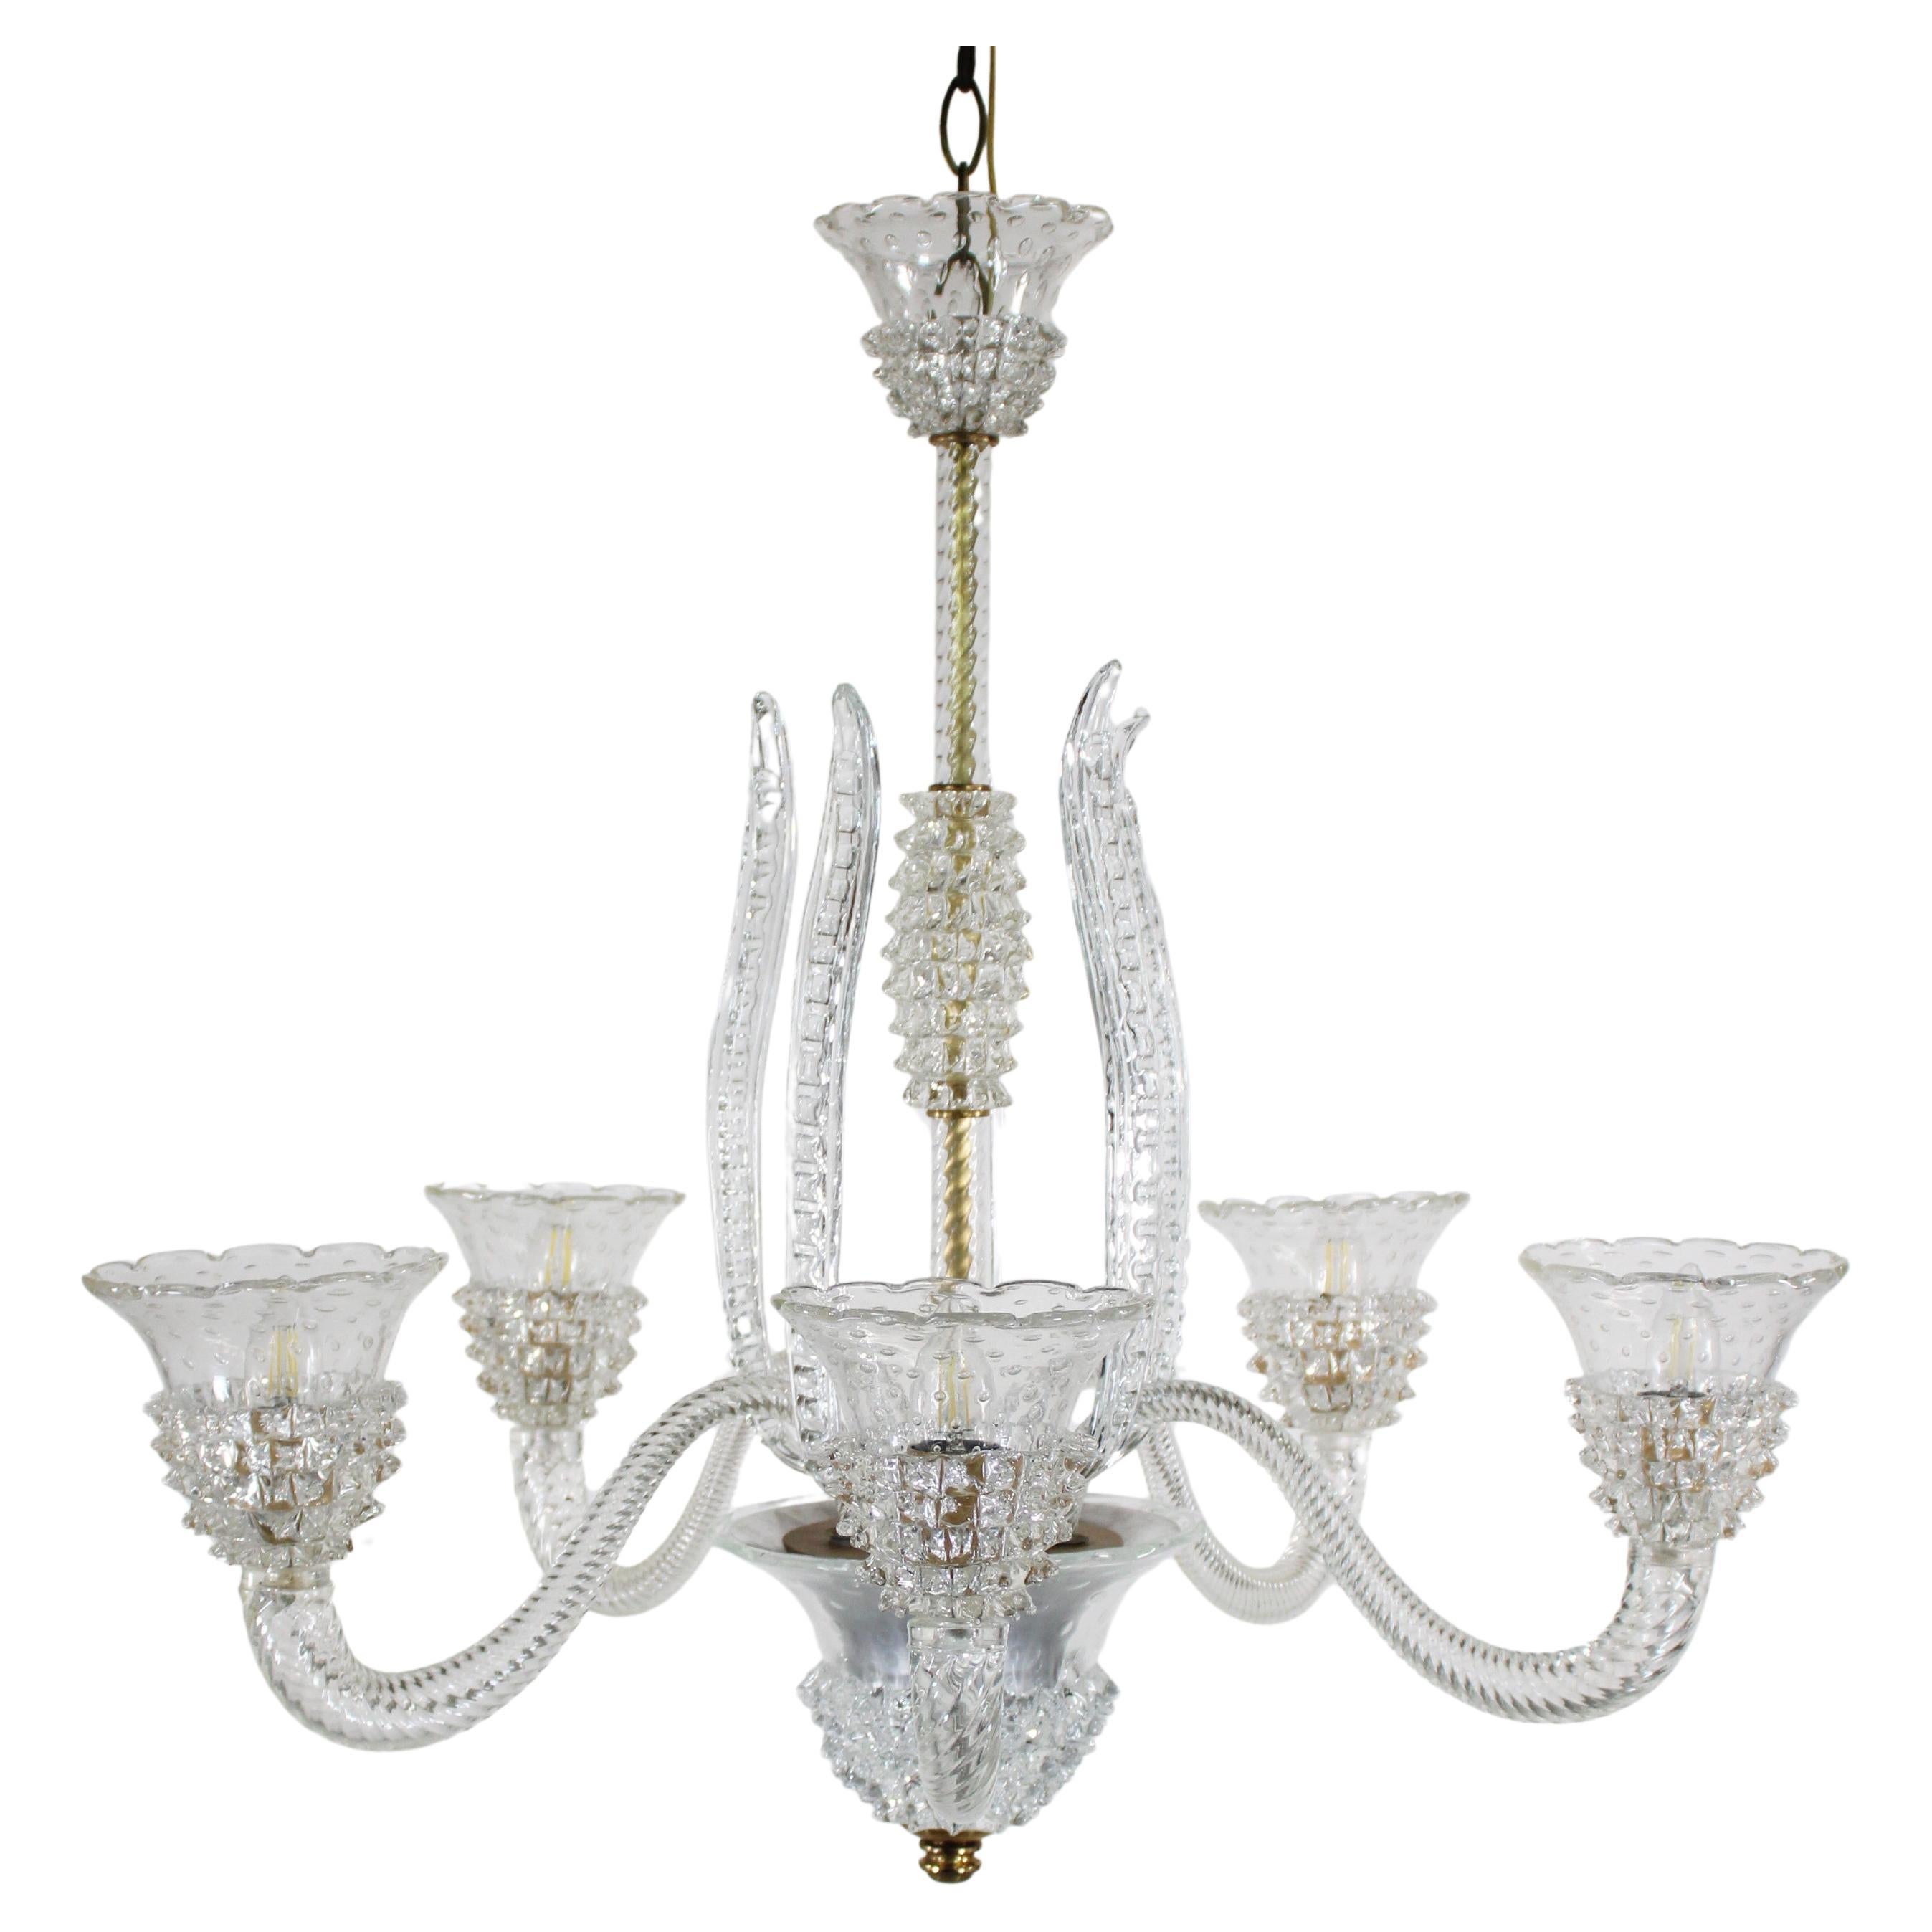 Five Arm Rostrato Murano Chandelier in the Manner of Ercole Barovier